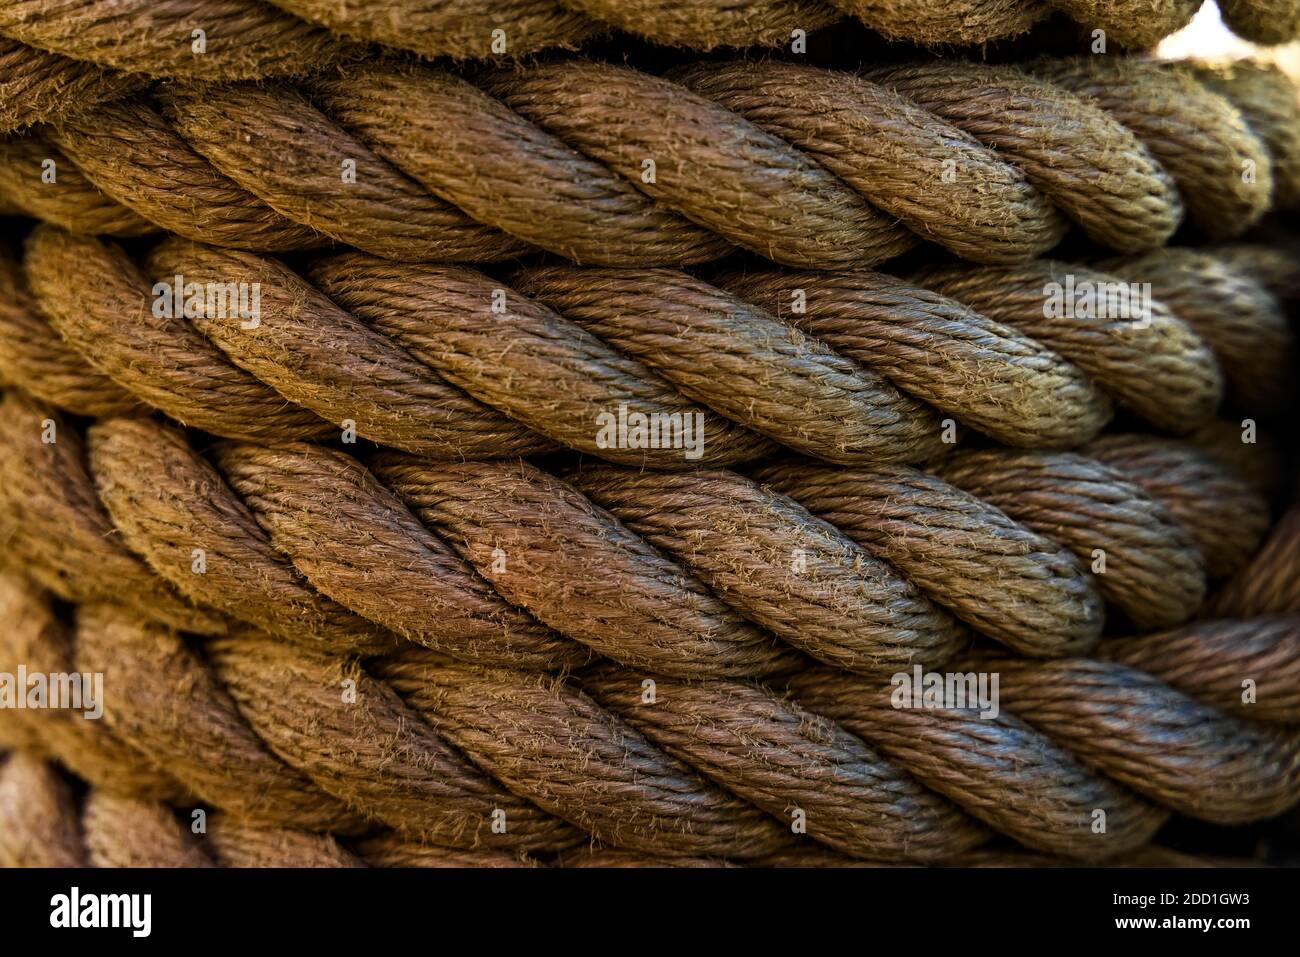 https://c8.alamy.com/comp/2DD1GW3/close-up-of-thick-marine-grade-hemp-rope-coiled-in-multiple-layers-2DD1GW3.jpg